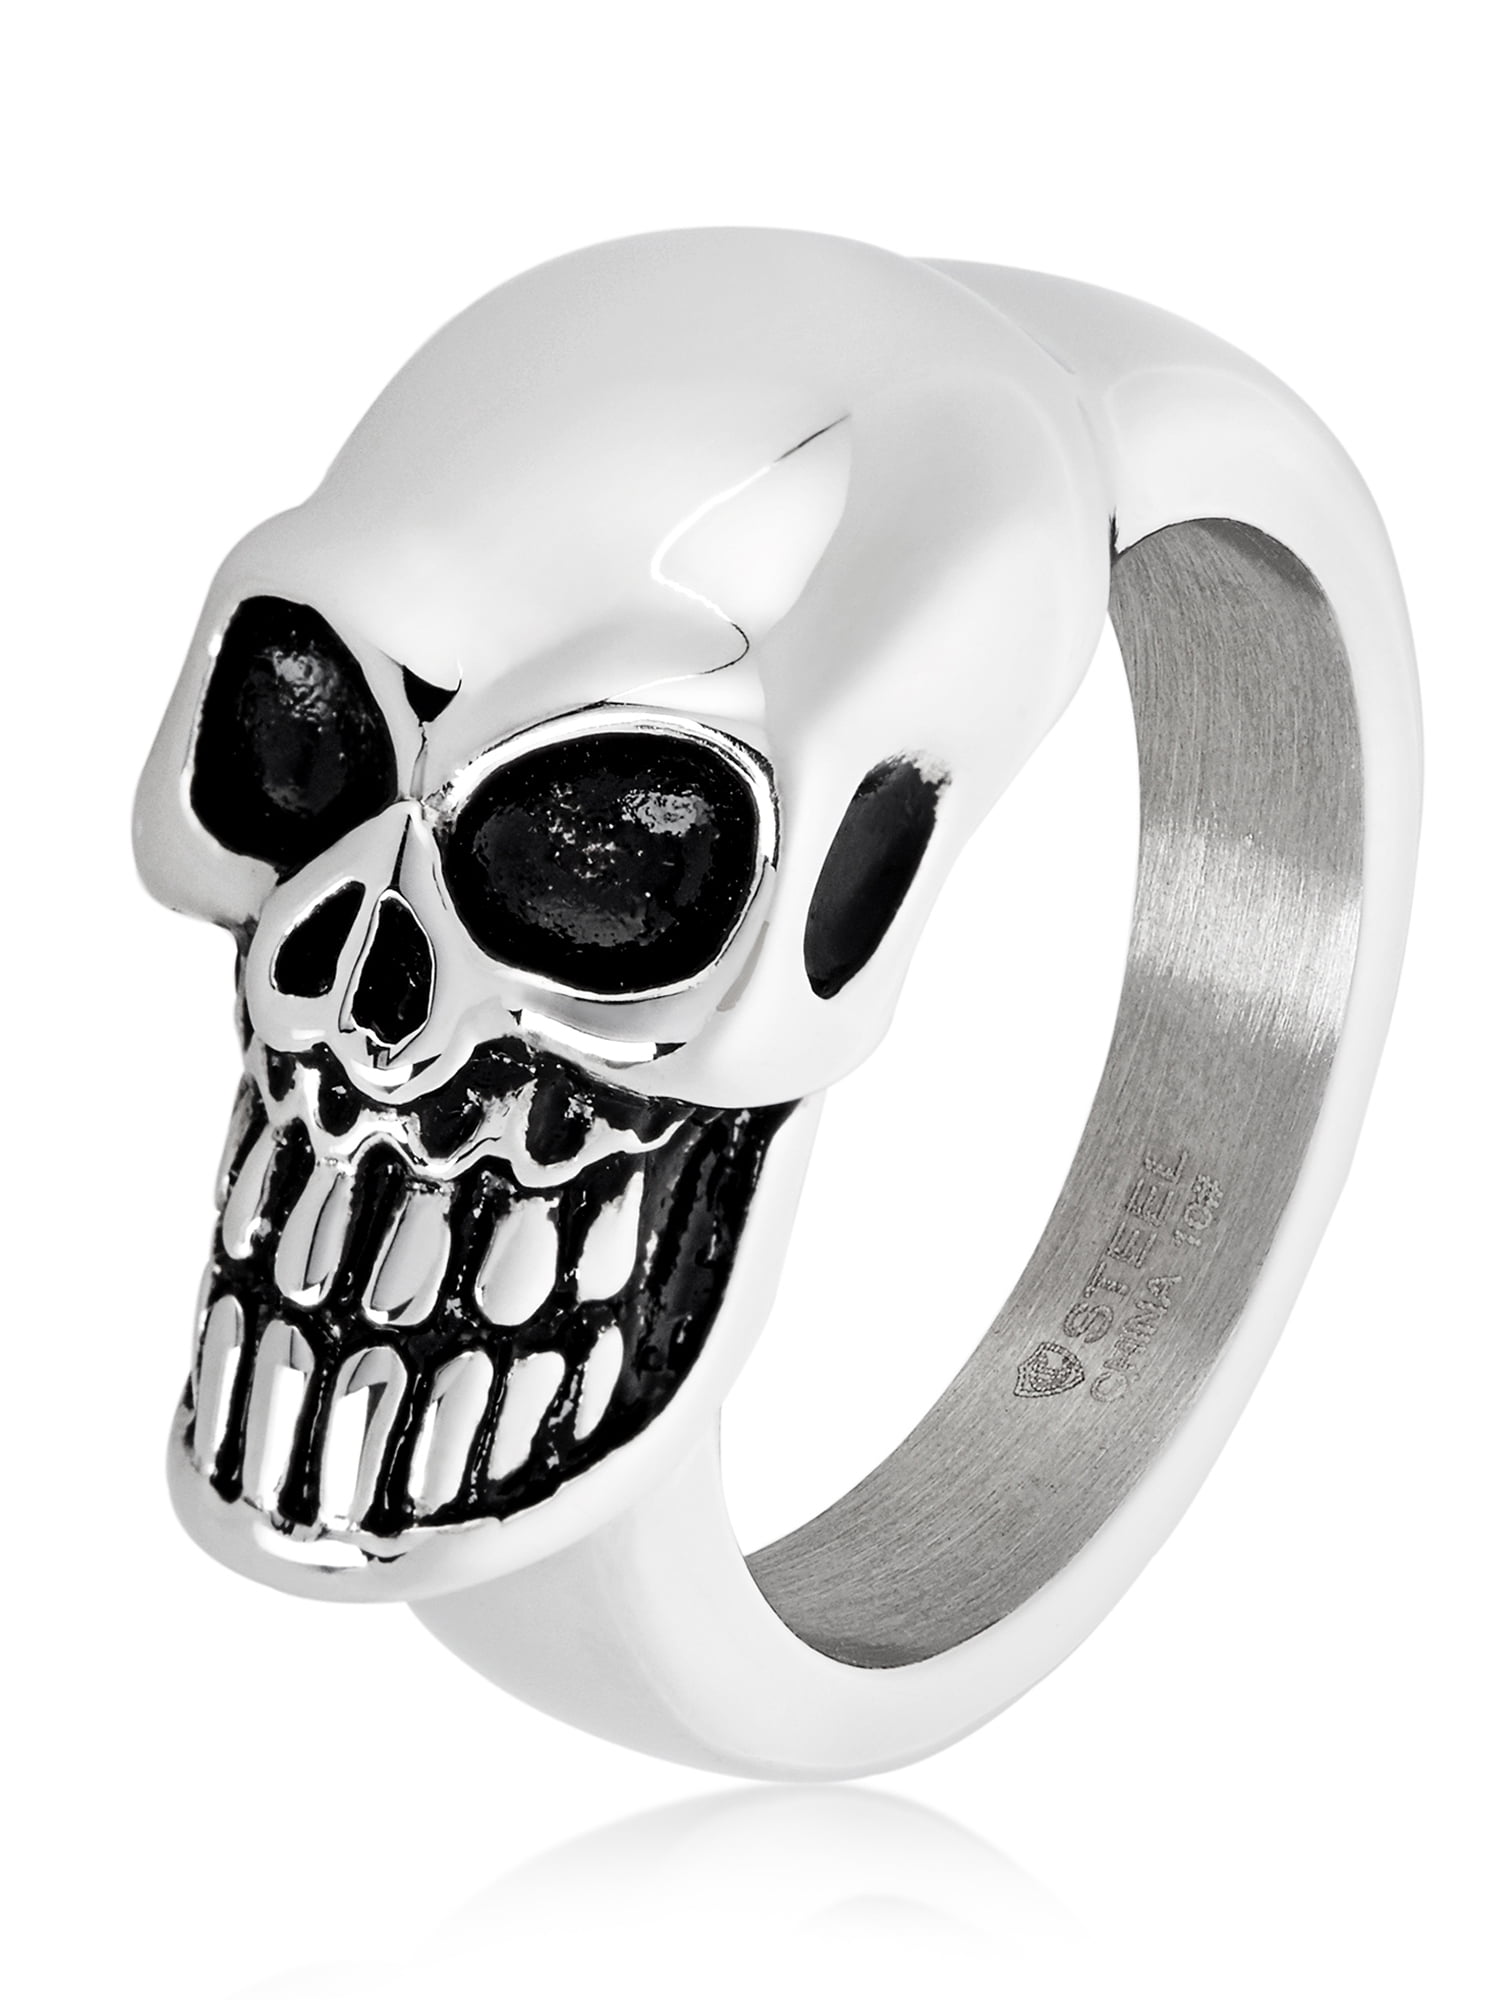 Stainless Steel Ring for Men Skull Head Solid Retro Pinky Ring